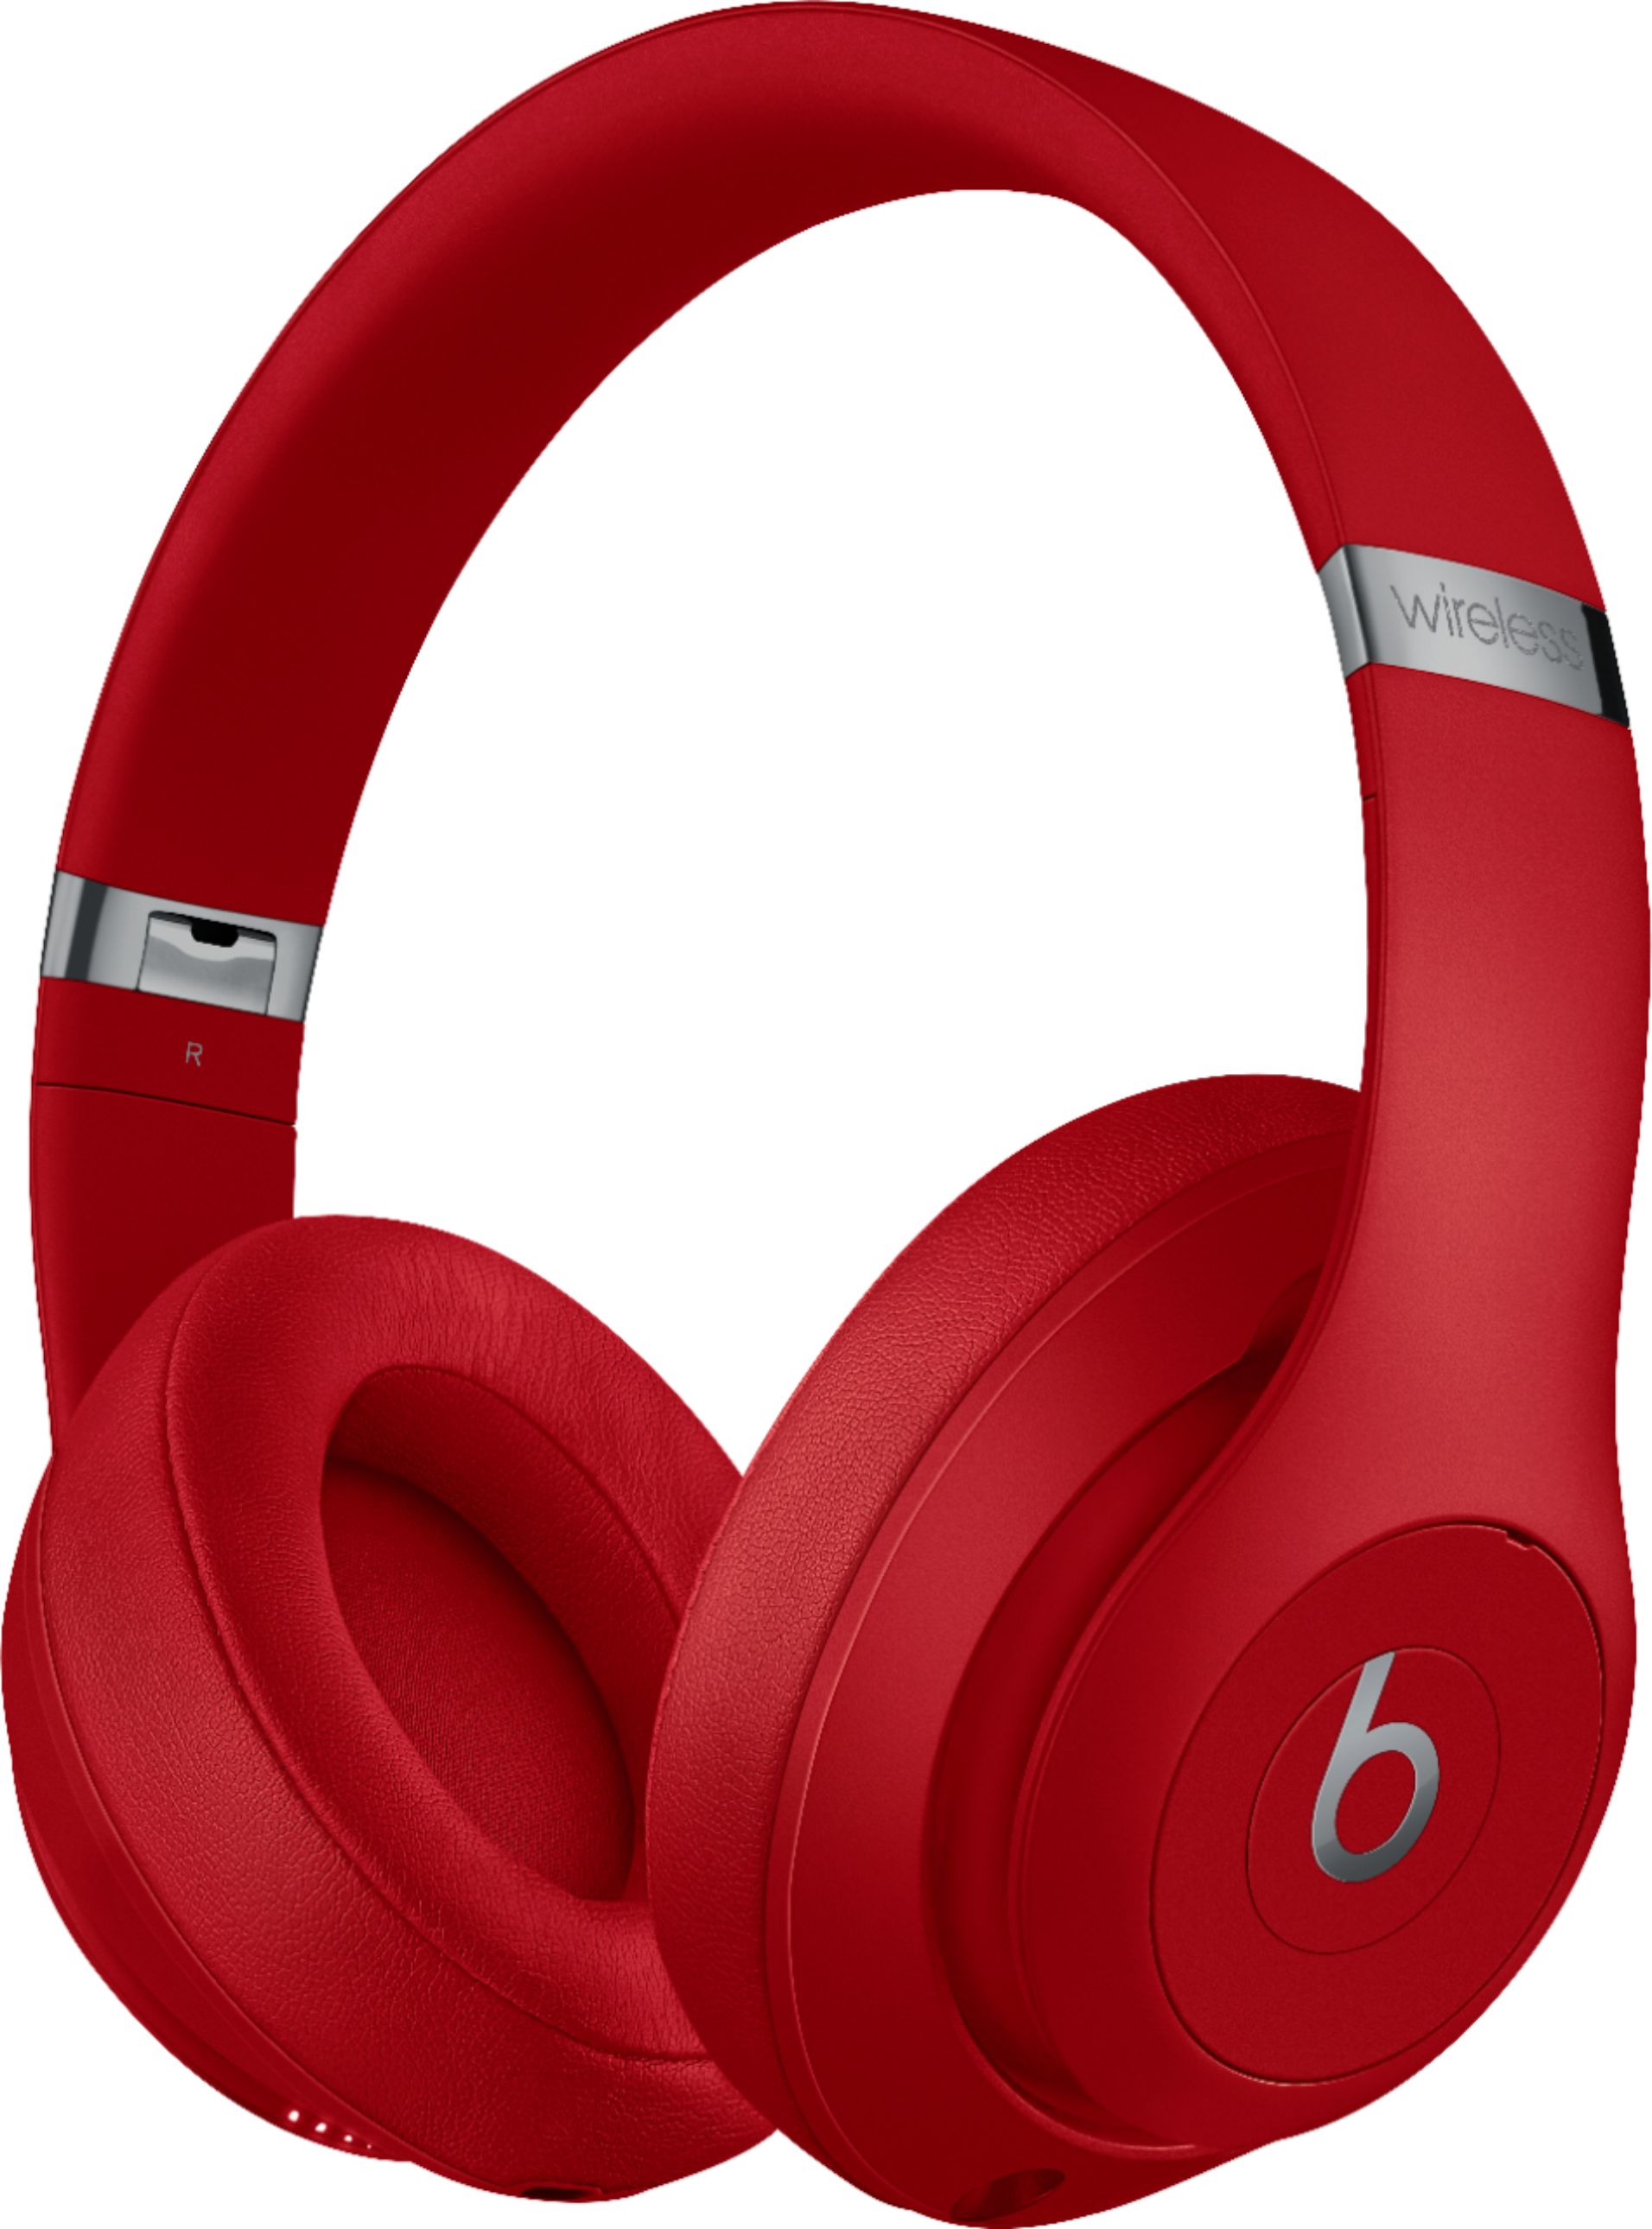 Beats by Dr. Dre Beats Studio³ Wireless Noise Cancelling Headphones Red